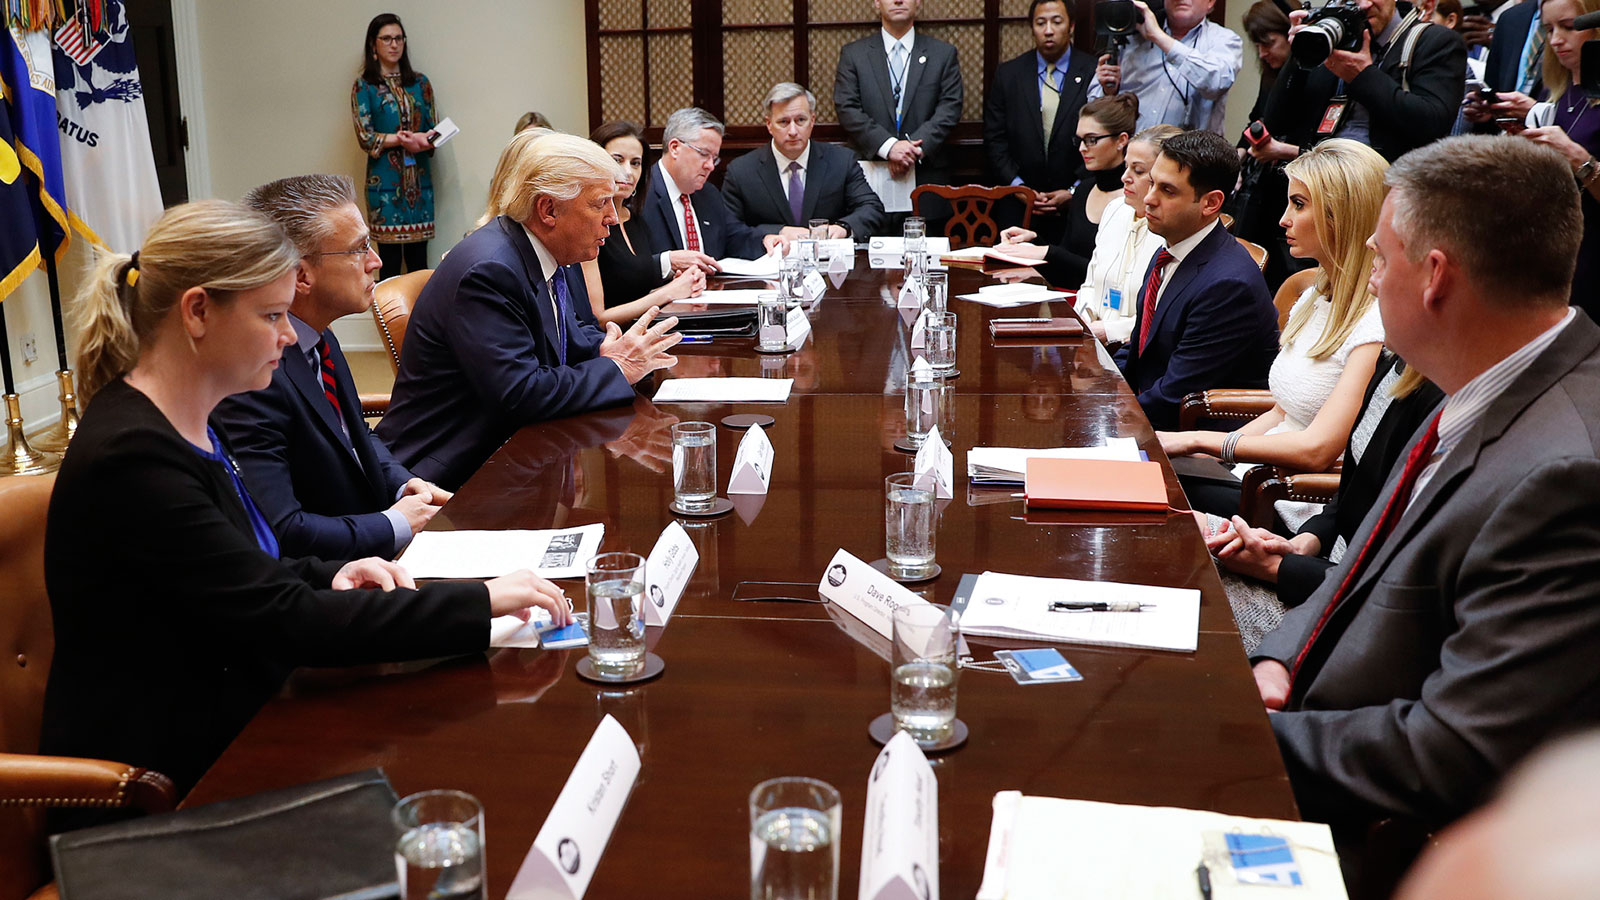 Victor Boutros meeting with President Trump